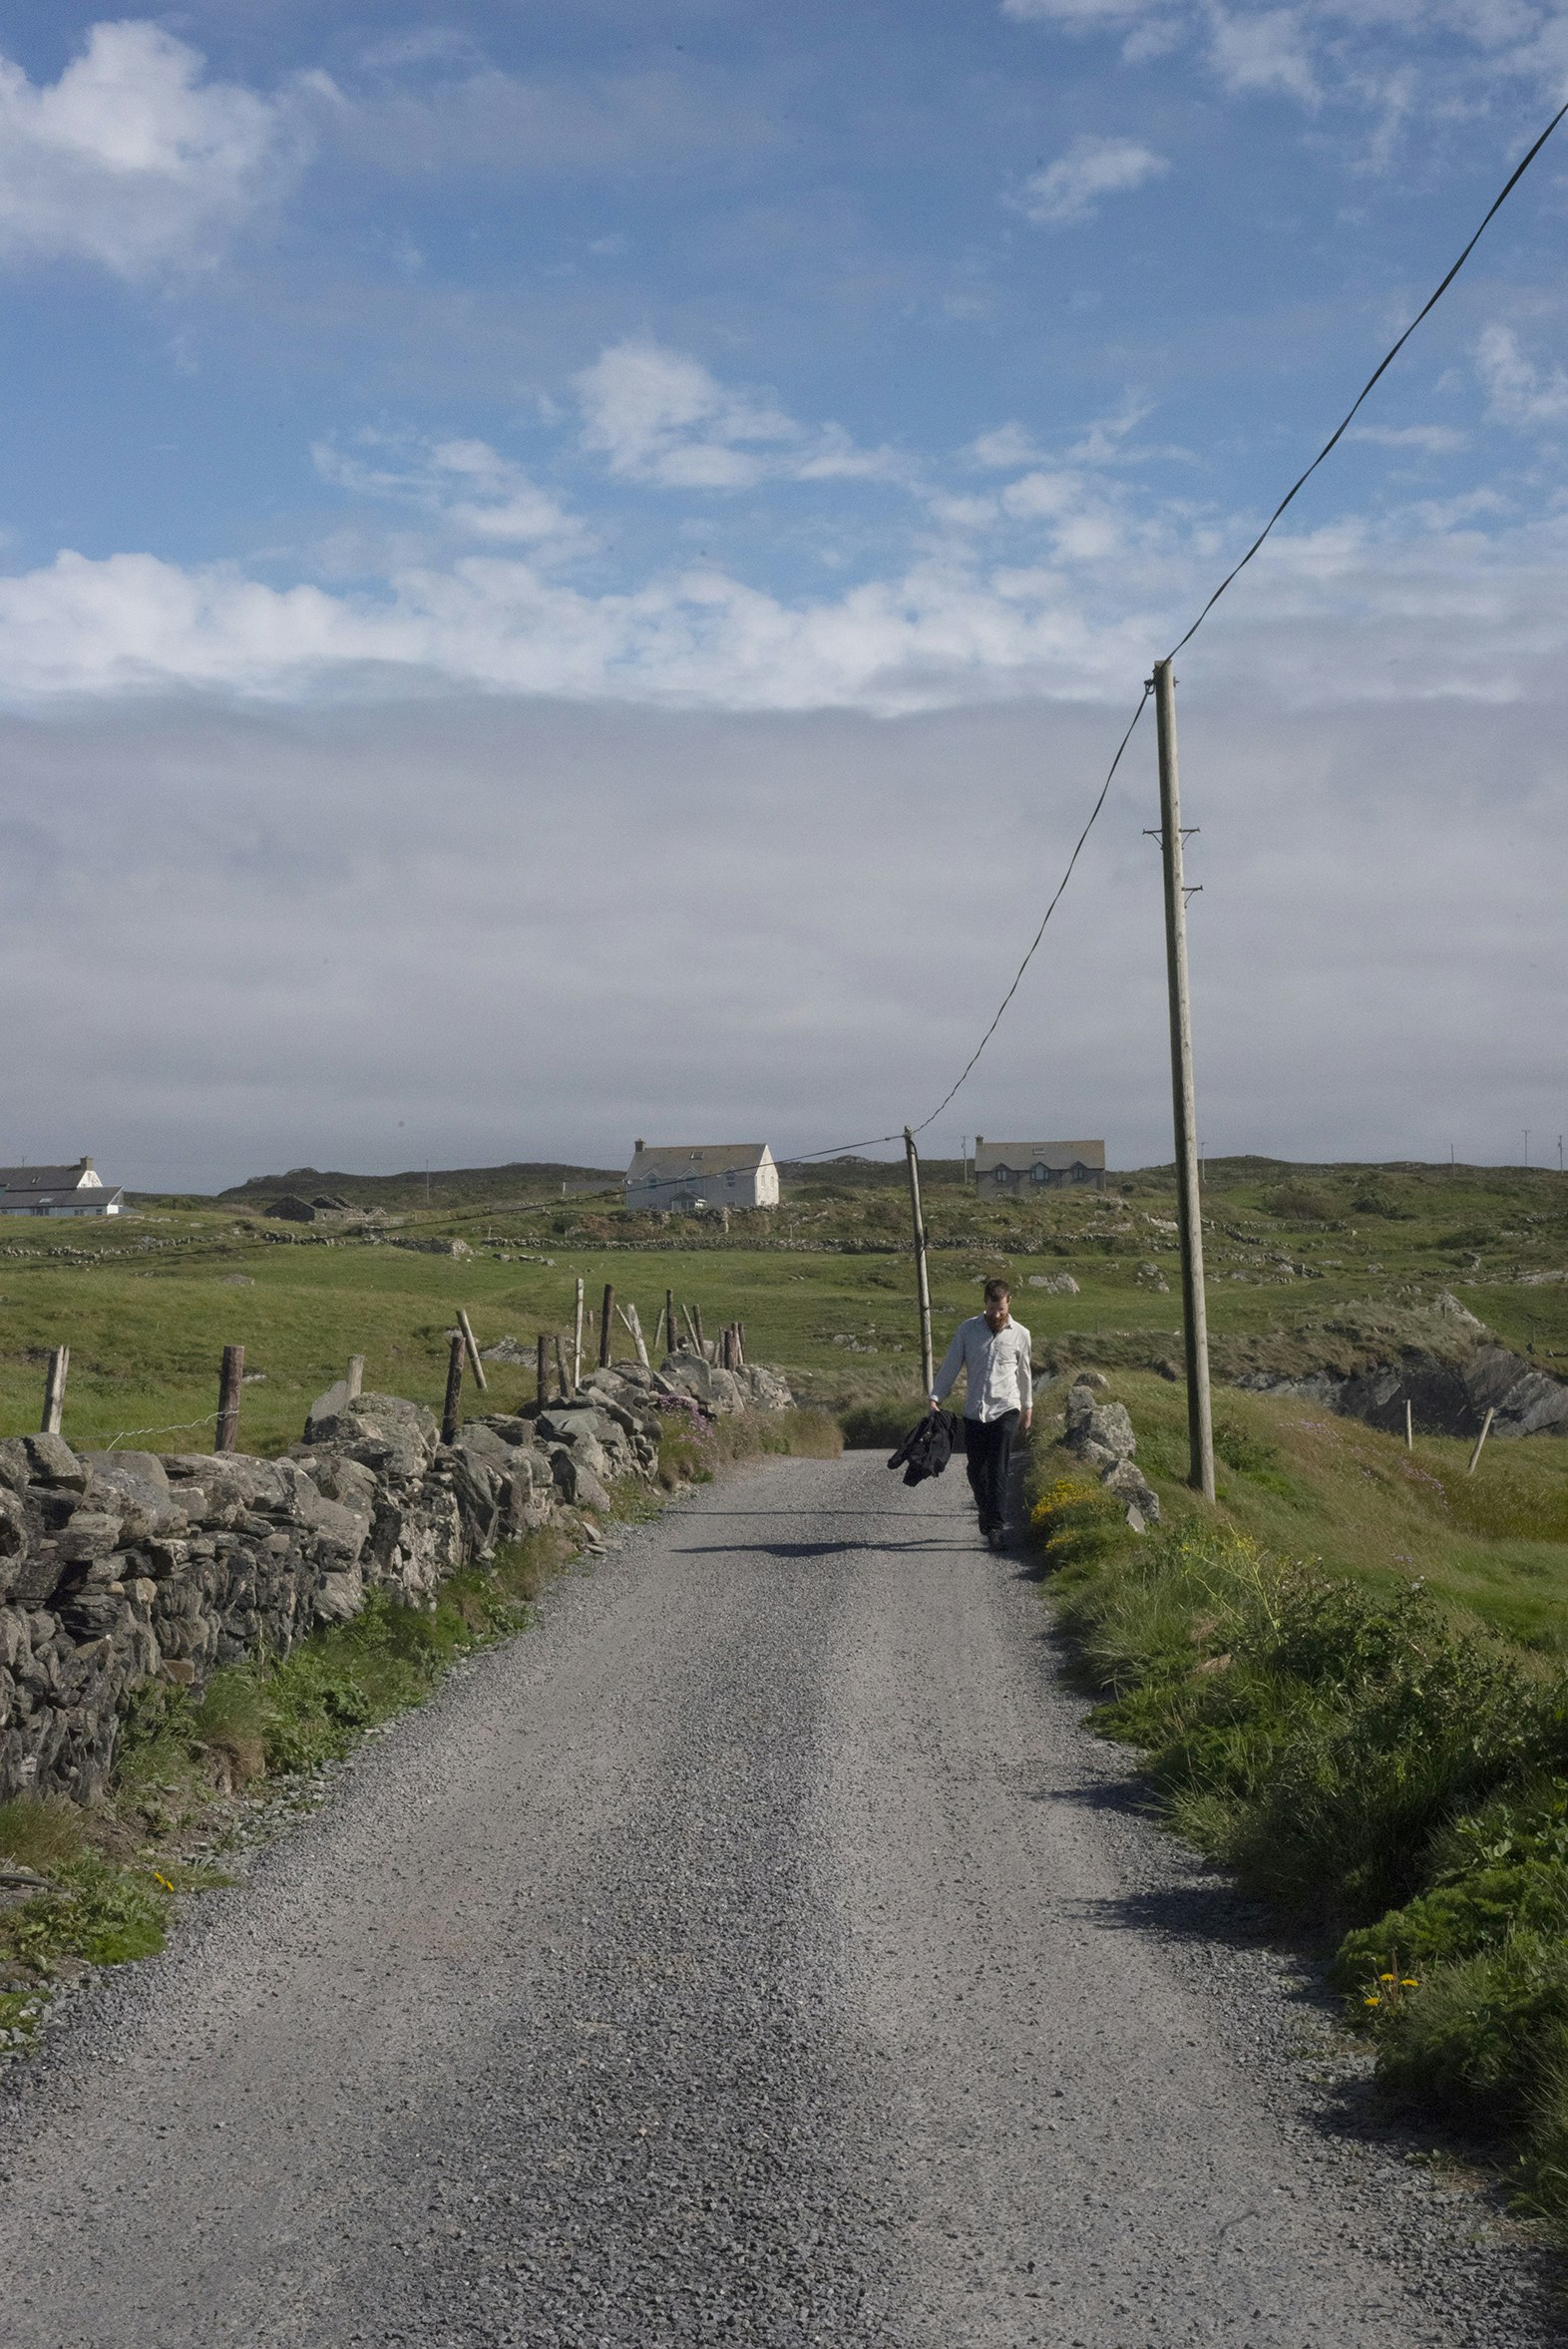 A man walks down a narrow rural road carrying his jacket. There are stone walls on either side and green fields all around.